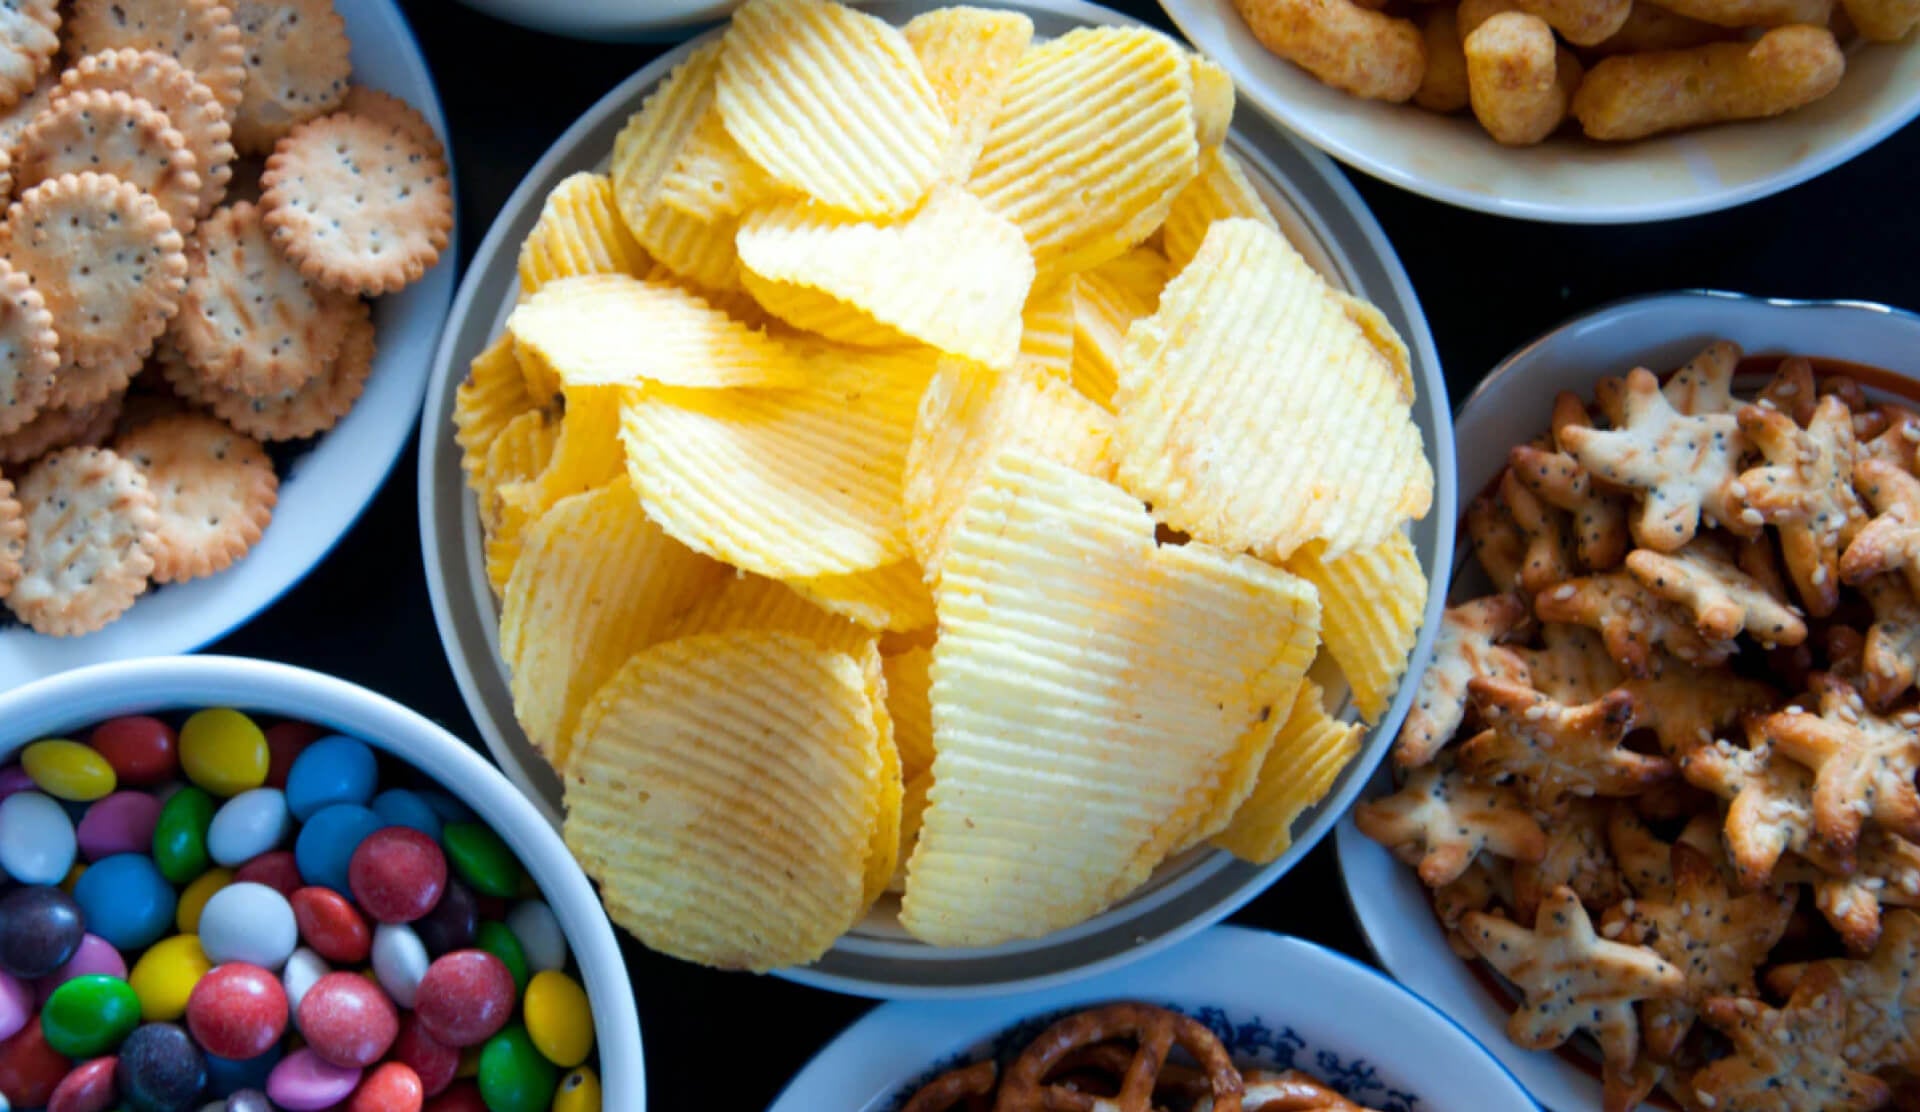 How to stop yourself from over snacking